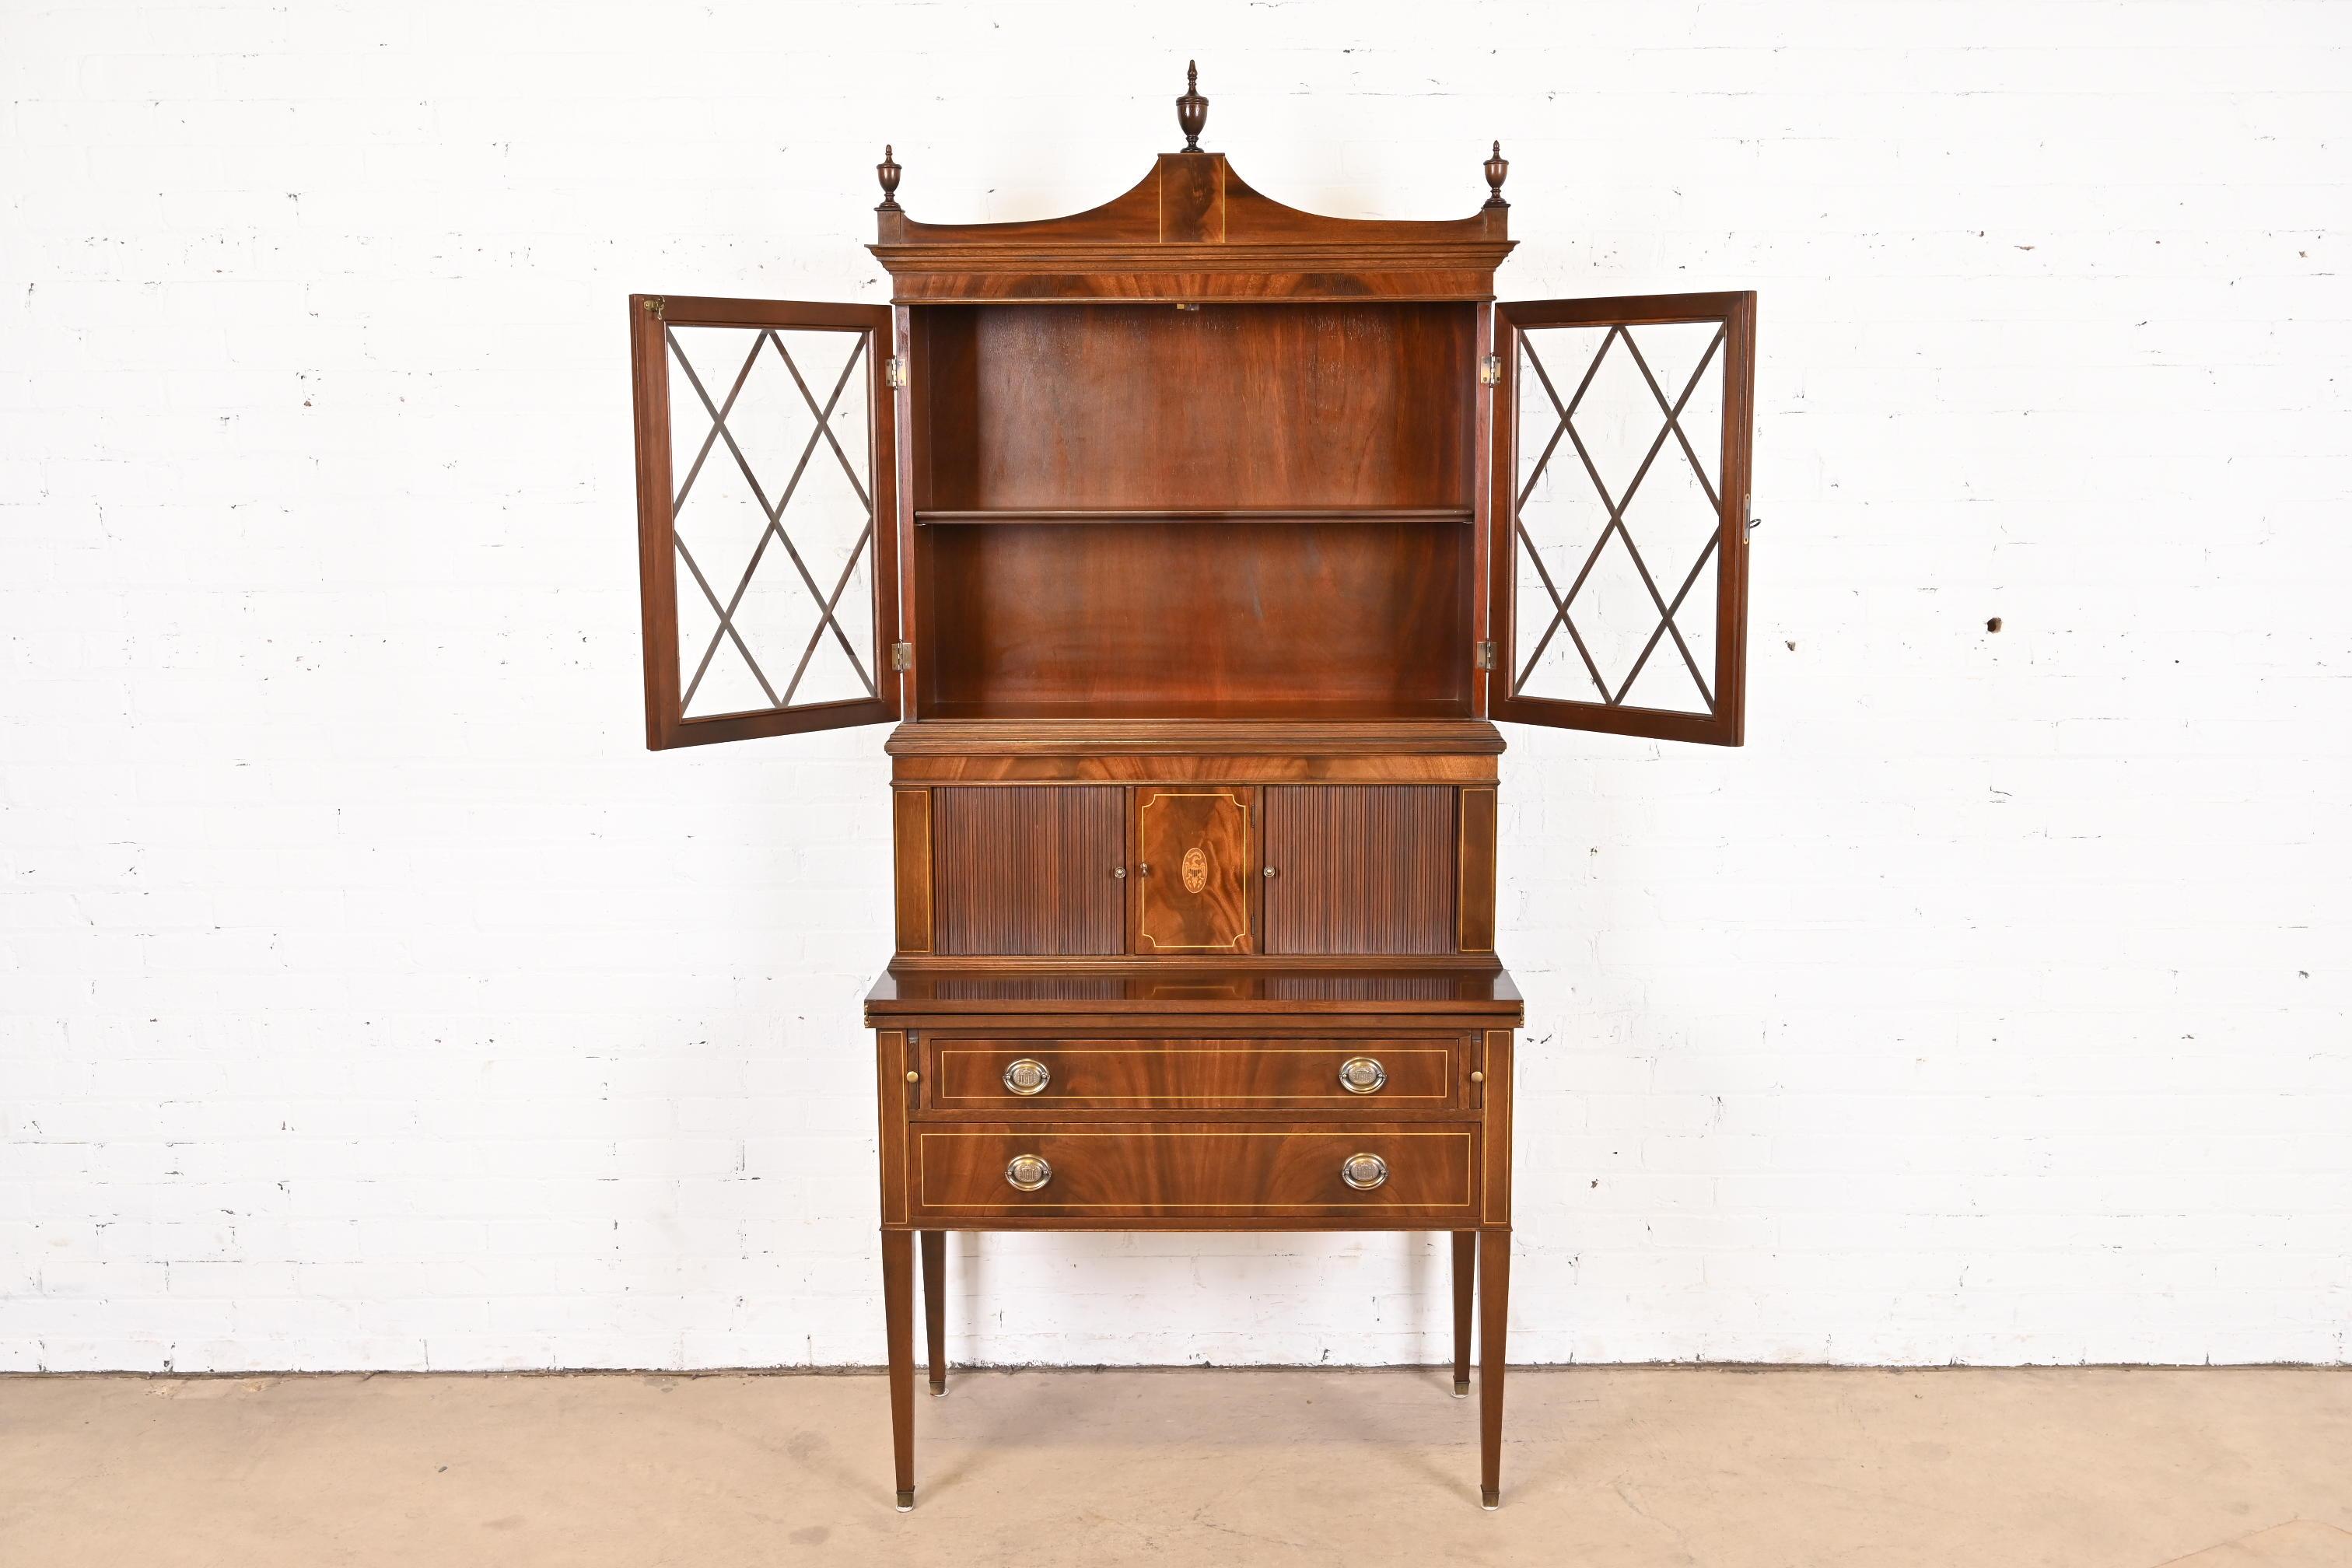 Mid-20th Century Federal Mahogany Secretary Desk With Bookcase Attributed to Imperial Furniture